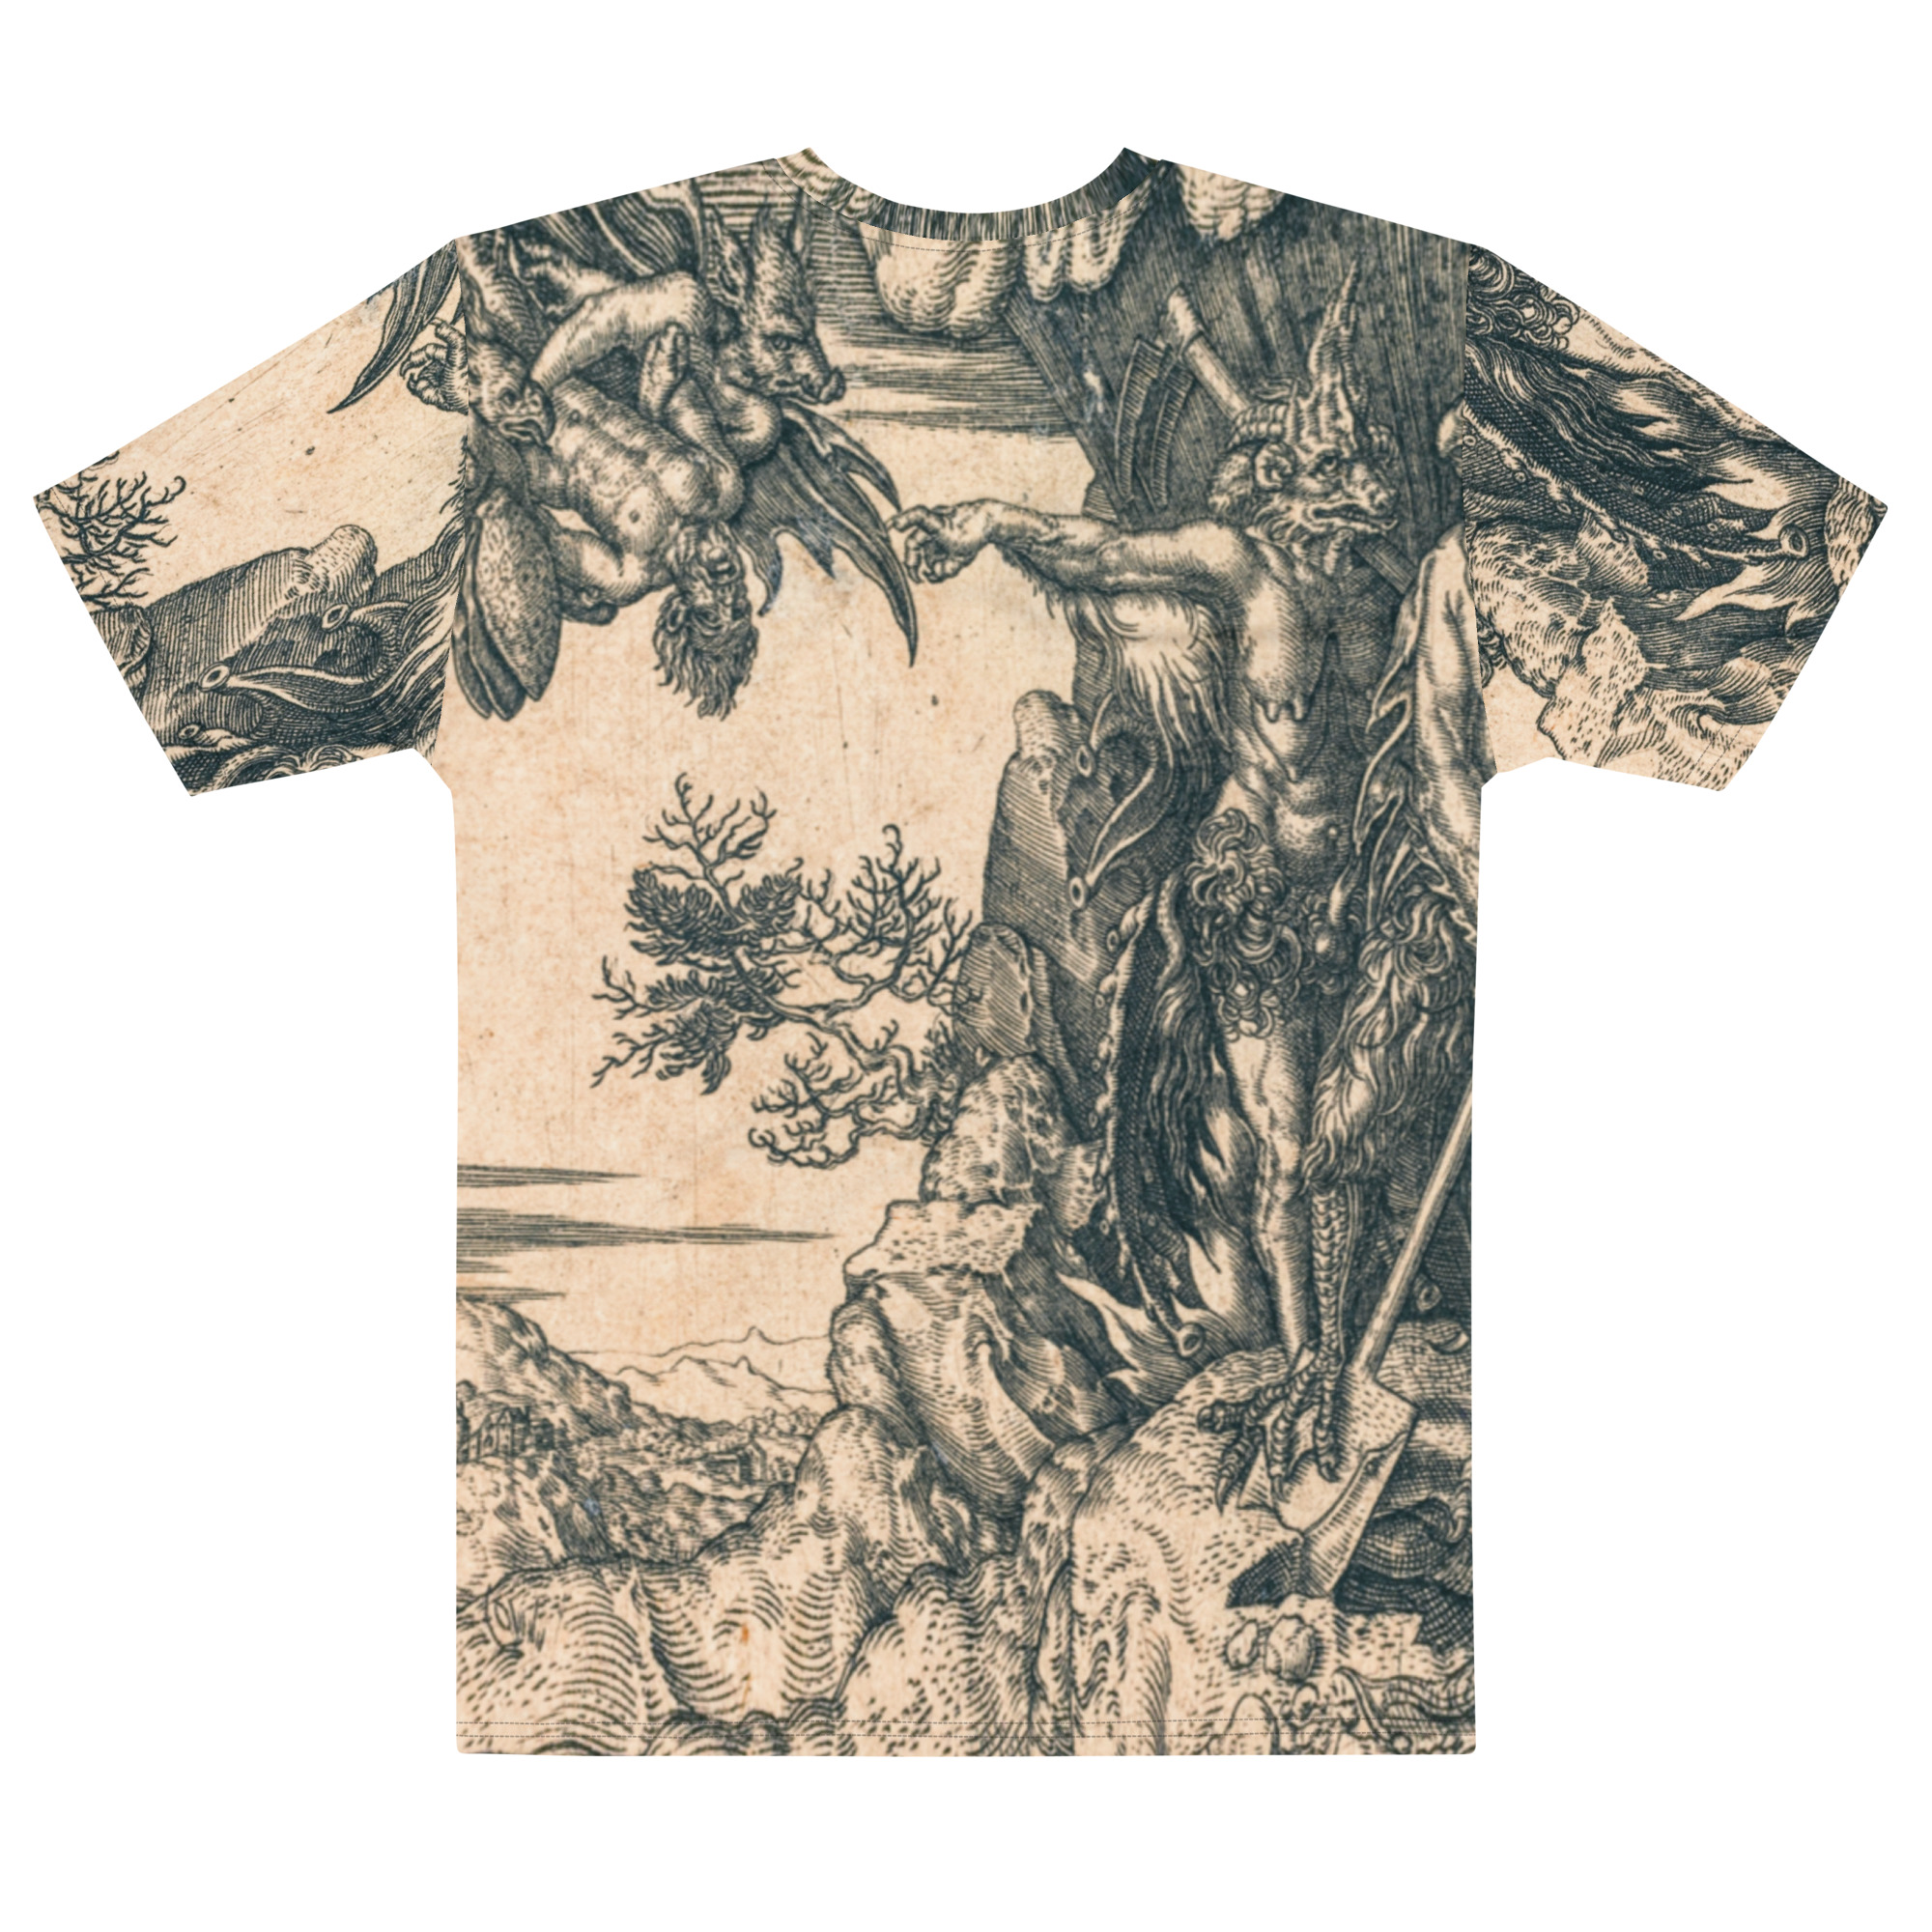 Featured image for “Rich Man Being Carried Away by Demons - Men's t-shirt”